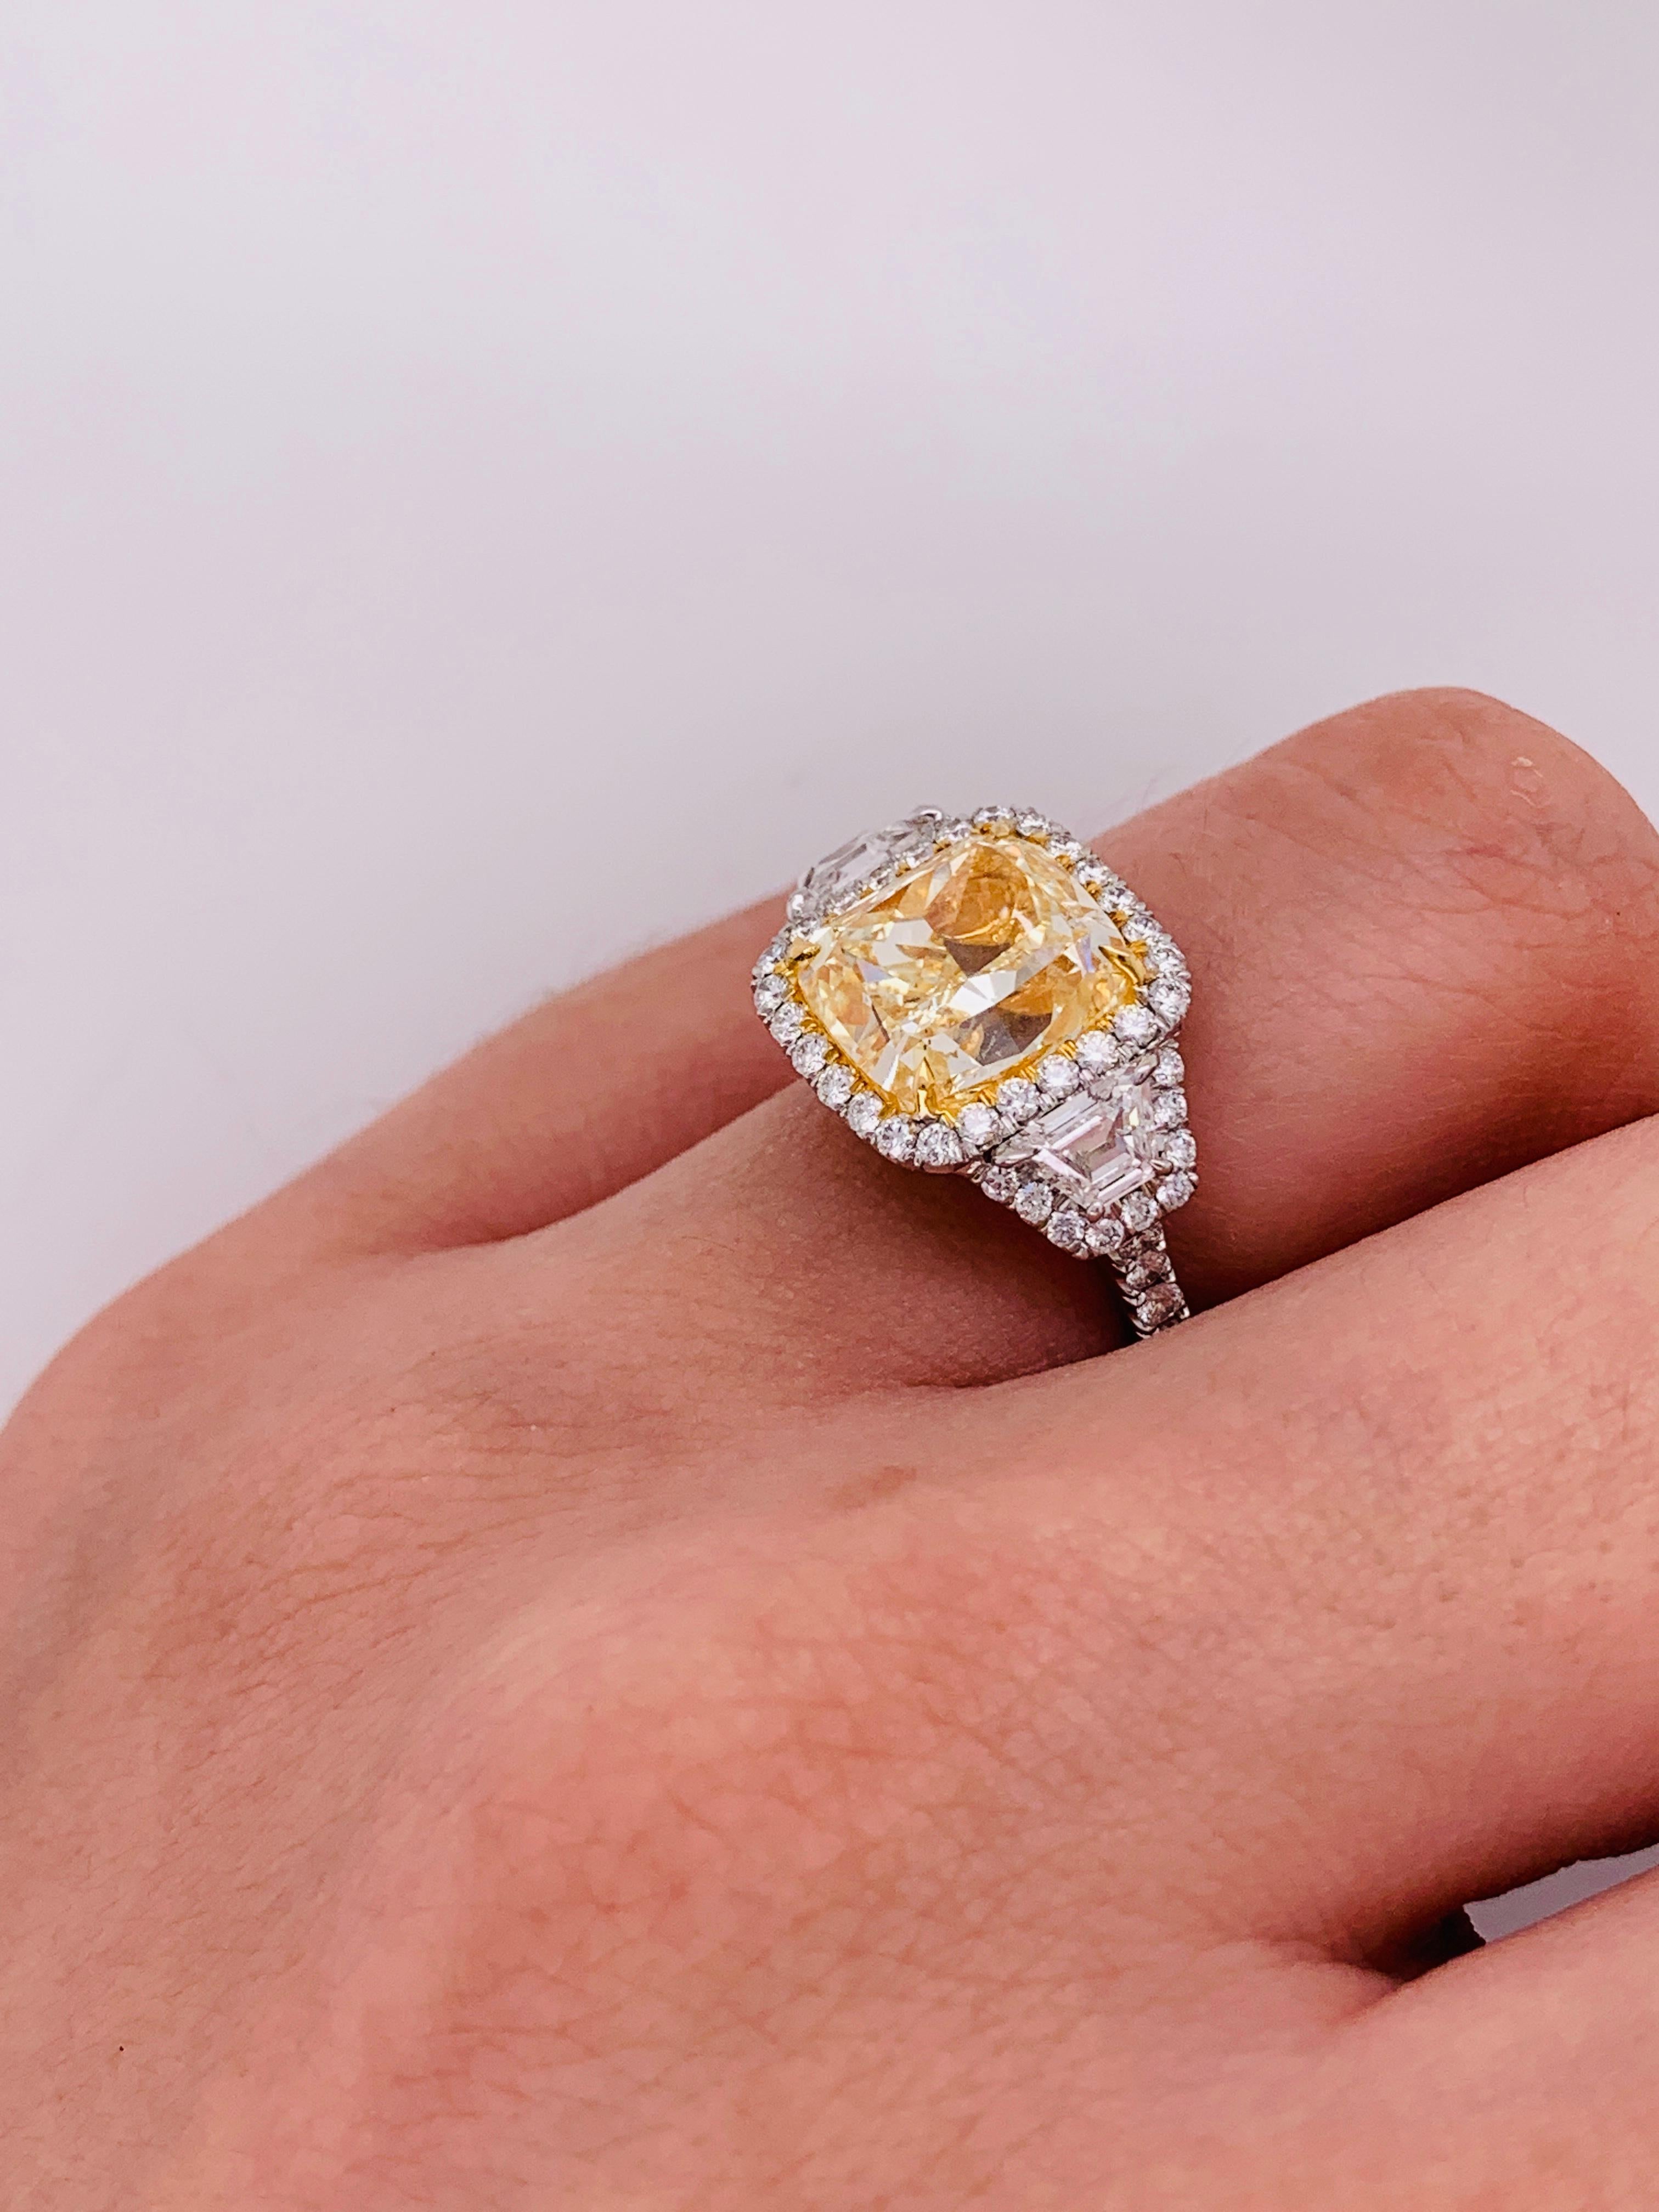 Modern 5.54 Carat Canary Yellow Diamond Ring For Sale